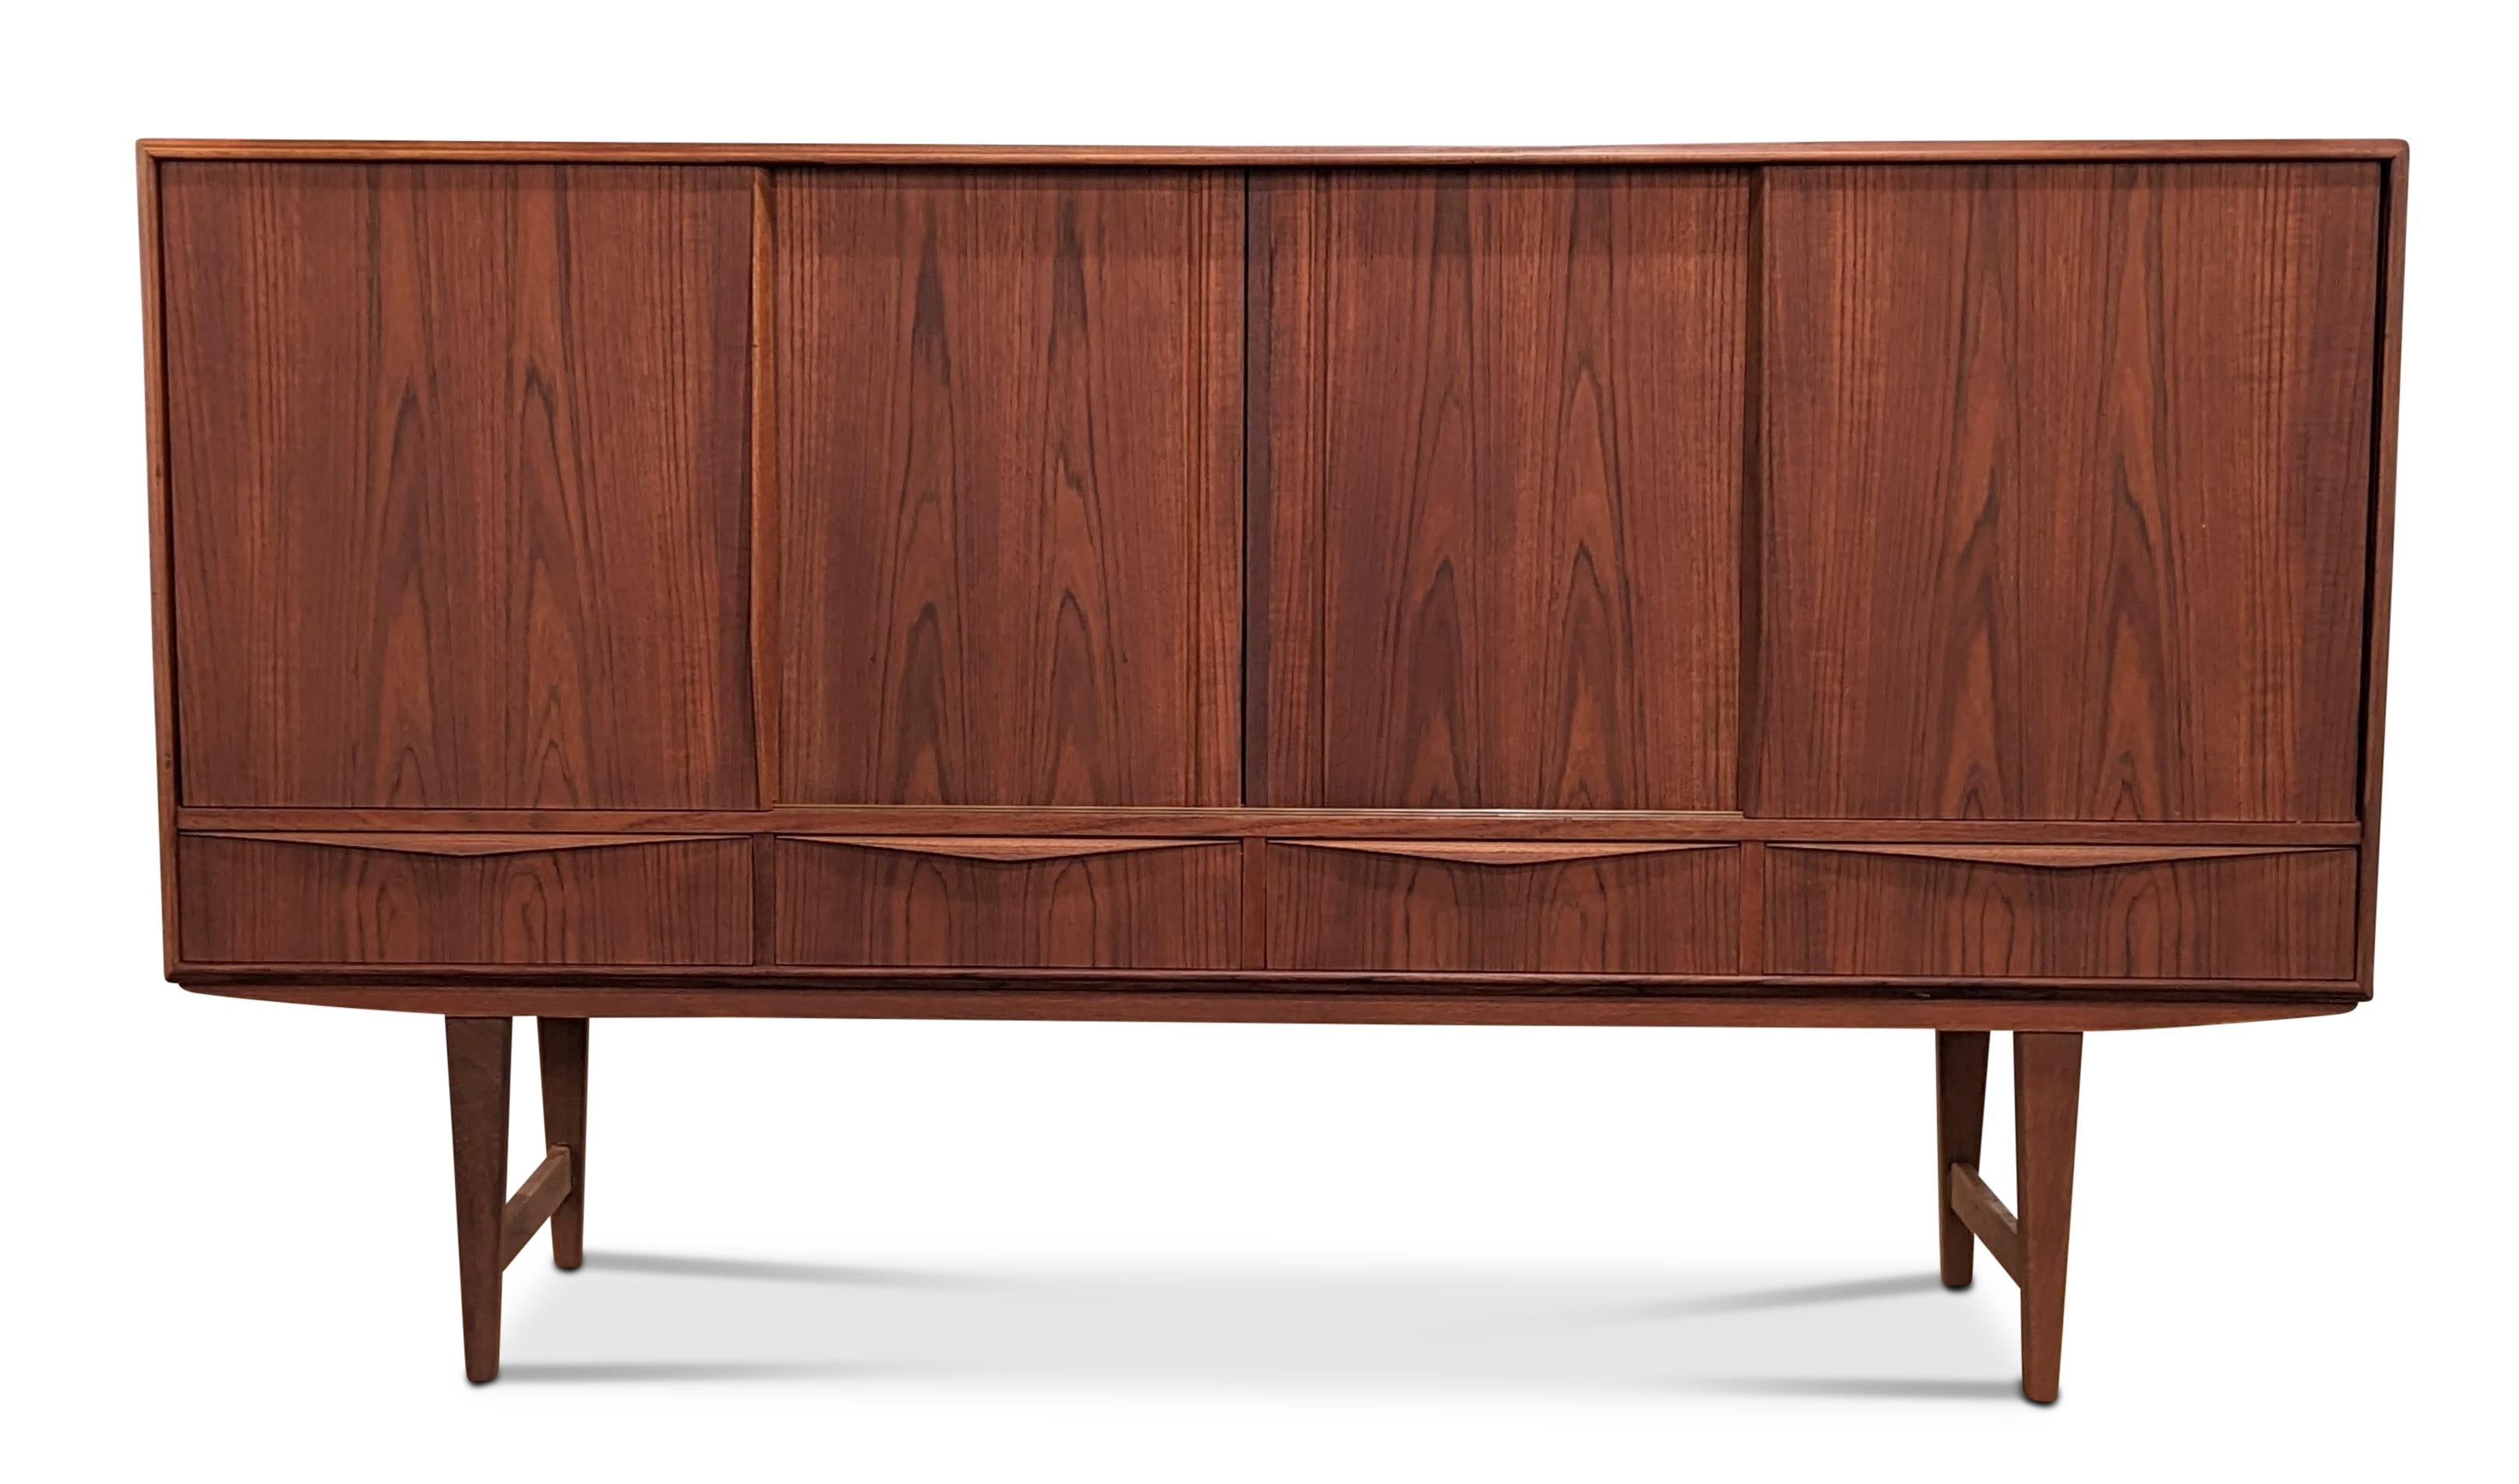 Vintage Danish Mid-Century Modern, made in the 1950s - Recently refurbished

This piece is more than 65+ years old and some wear and tear can be expected, but we do everything we can to refurbish them in respect to the design.

There is a science